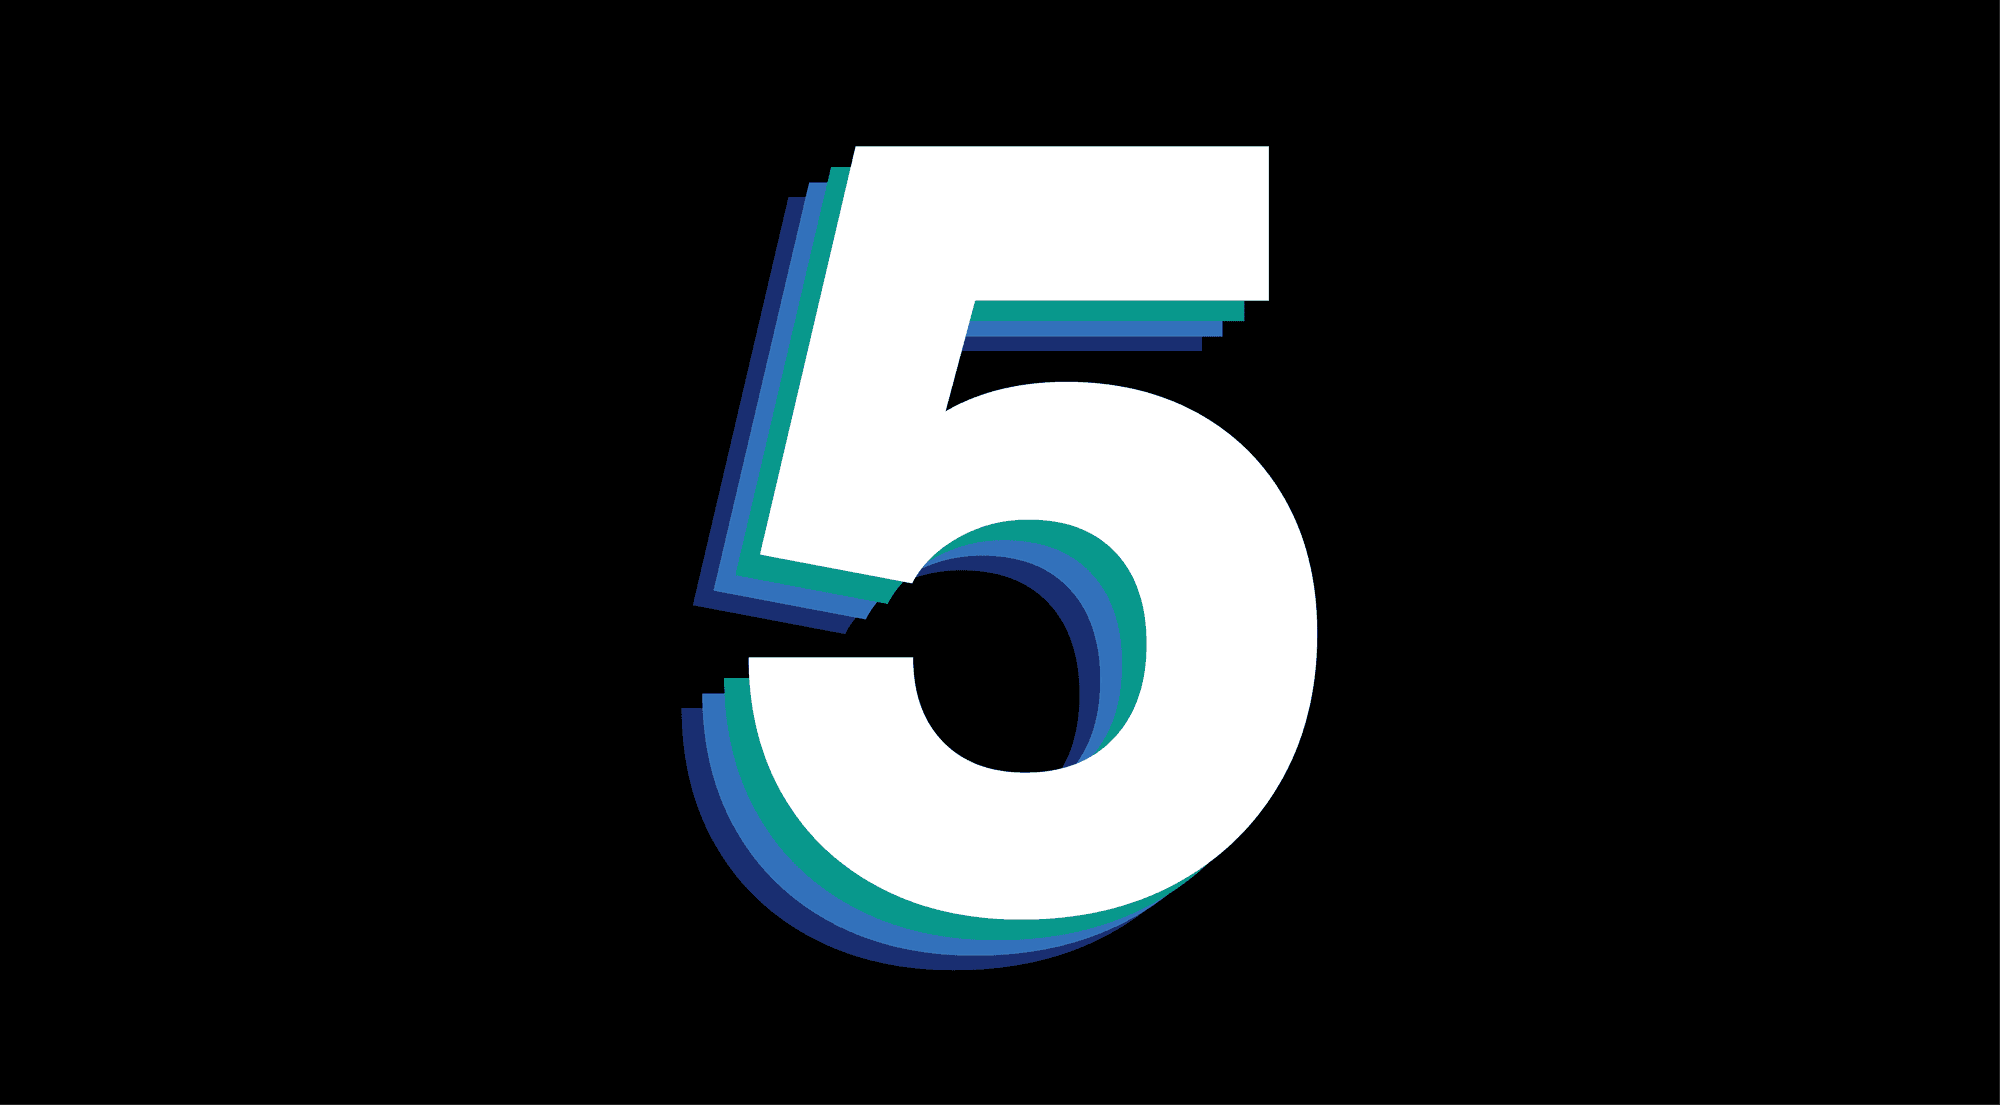 an image showing the number 5